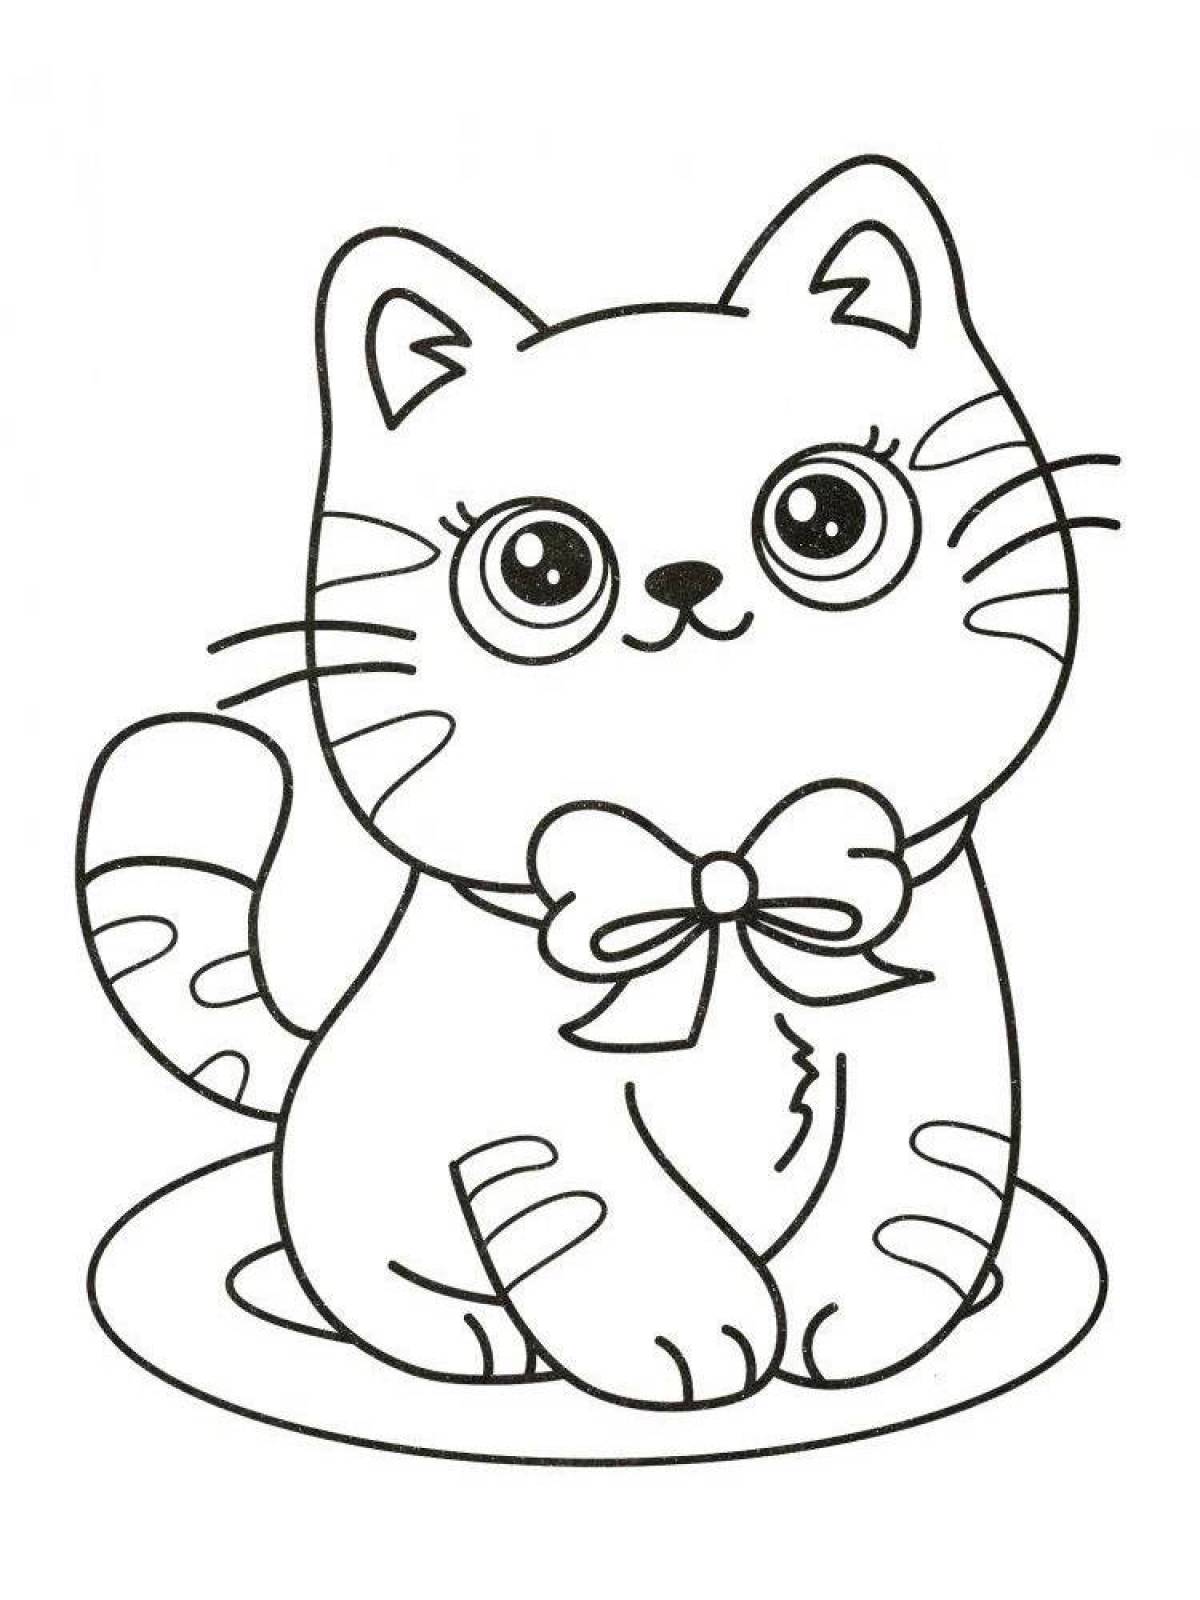 Fancy cats coloring pages for kids